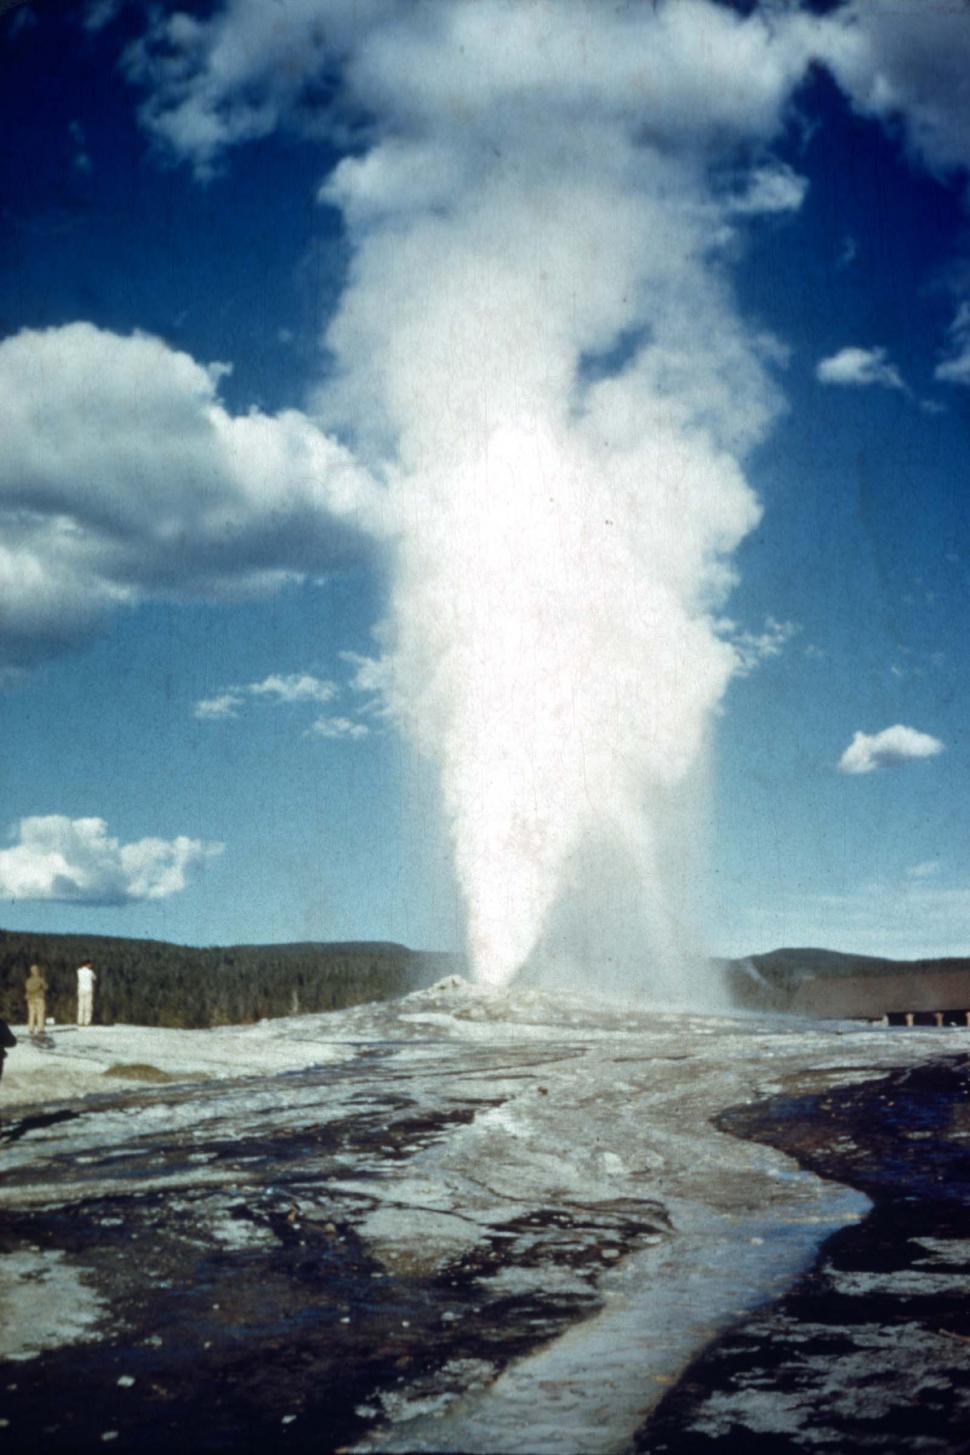 Free Image of yellowstone national park old faithful geysers landscapes vintage photo eruptions geothermal energy steam geology geologic formations vintage photograph FACAT001 